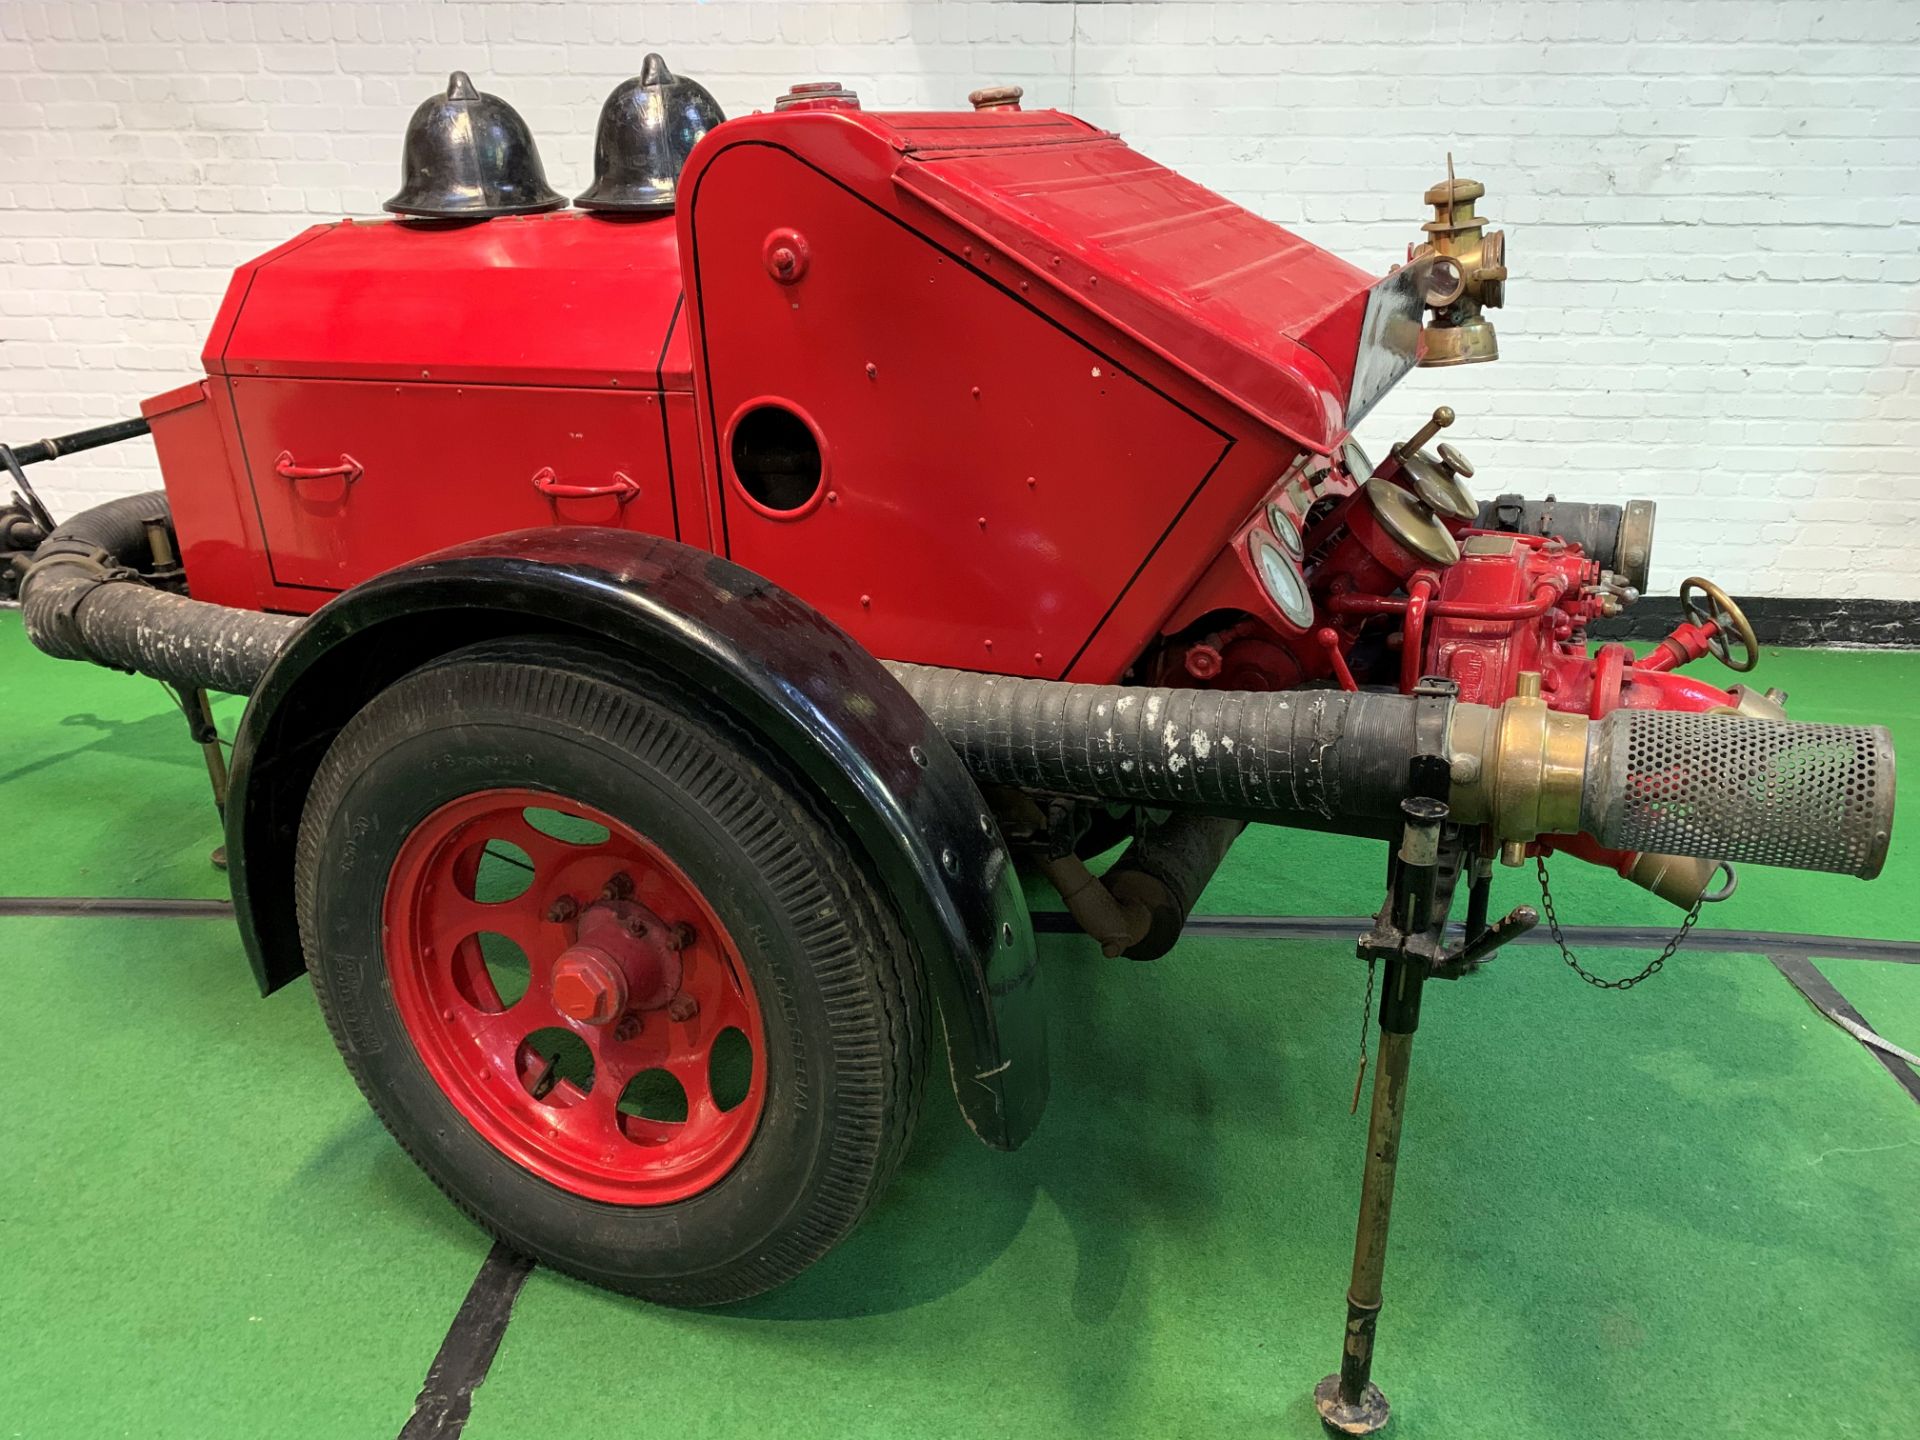 1938 DENNIS trailer pump, with 3770cc 4 cylinder petrol engine and 2 stage high pressure turbine - Image 3 of 10